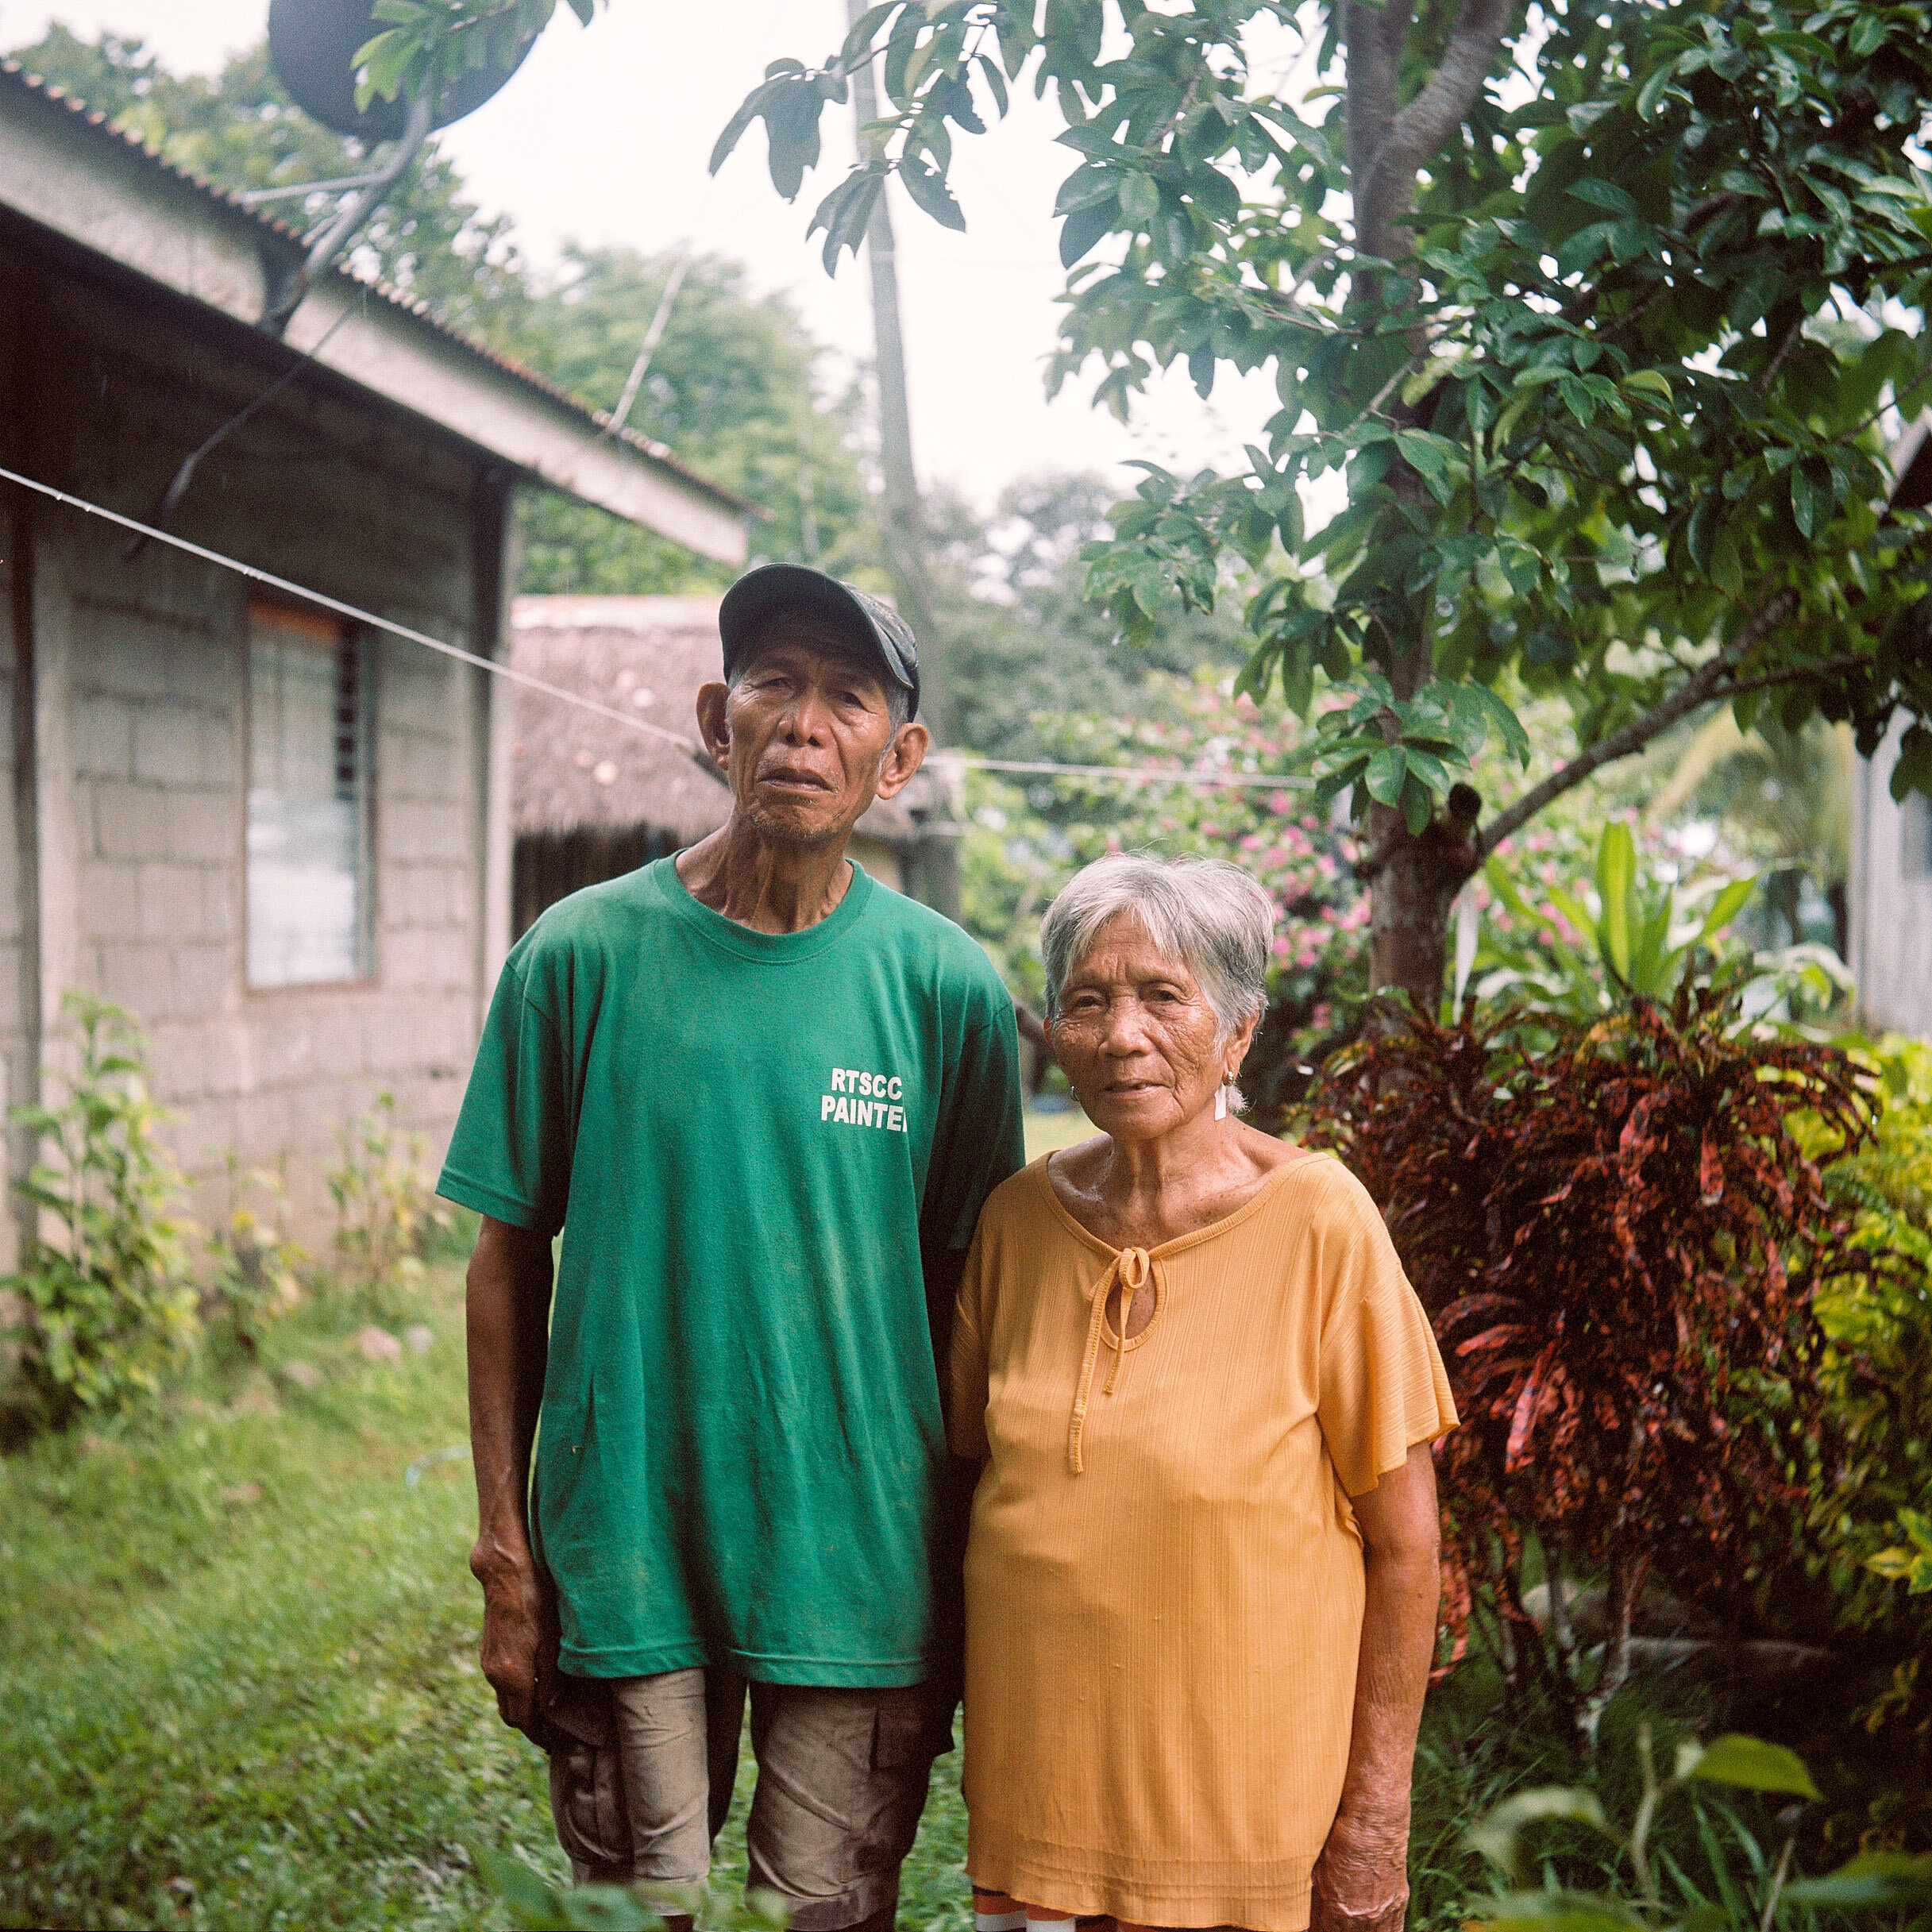  Jaime Sasota and Virginia Sebuan, Auntie Nora’s uncle and auntie. Jaime is known for growing the most delicious avocados in the village. Auntie Nora tells me many people ask to buy them off him, but he has always refused and gives them away to famil